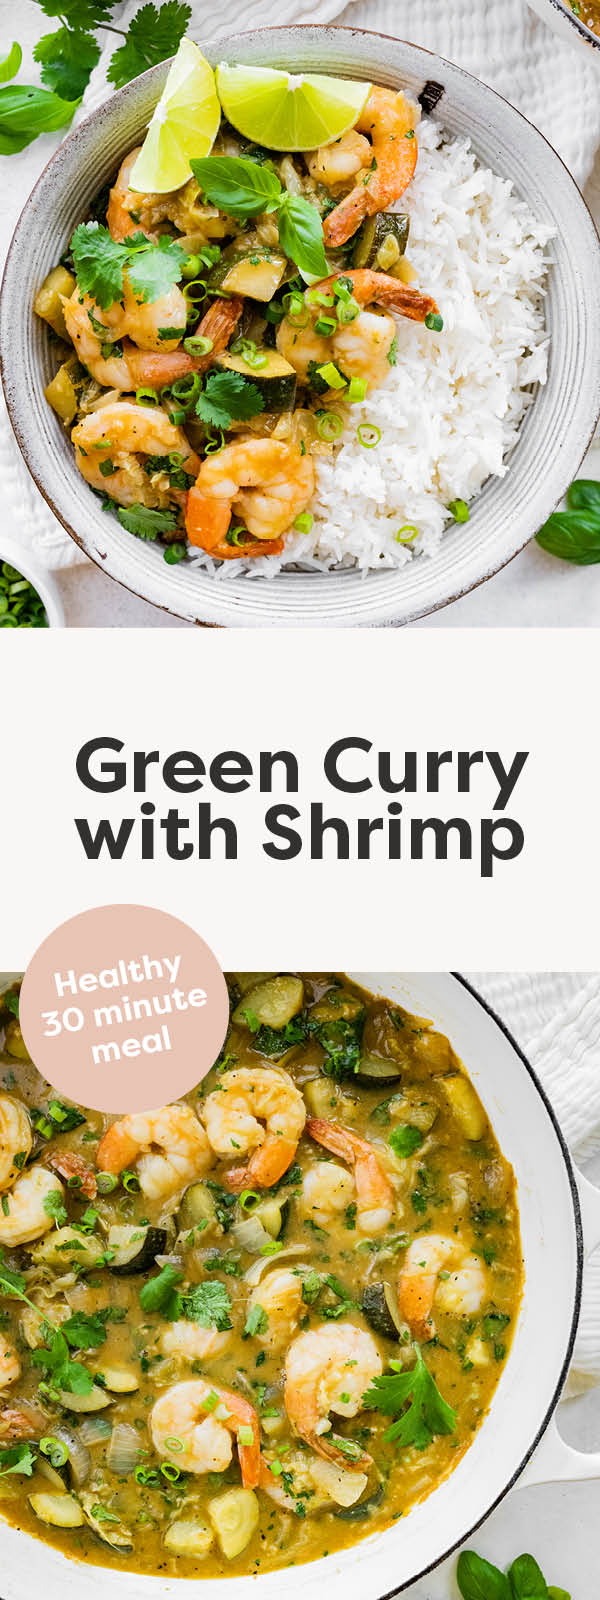 Bowl of green curry shrimp and rice. Photo below is of the shrimp green curry in a pot.